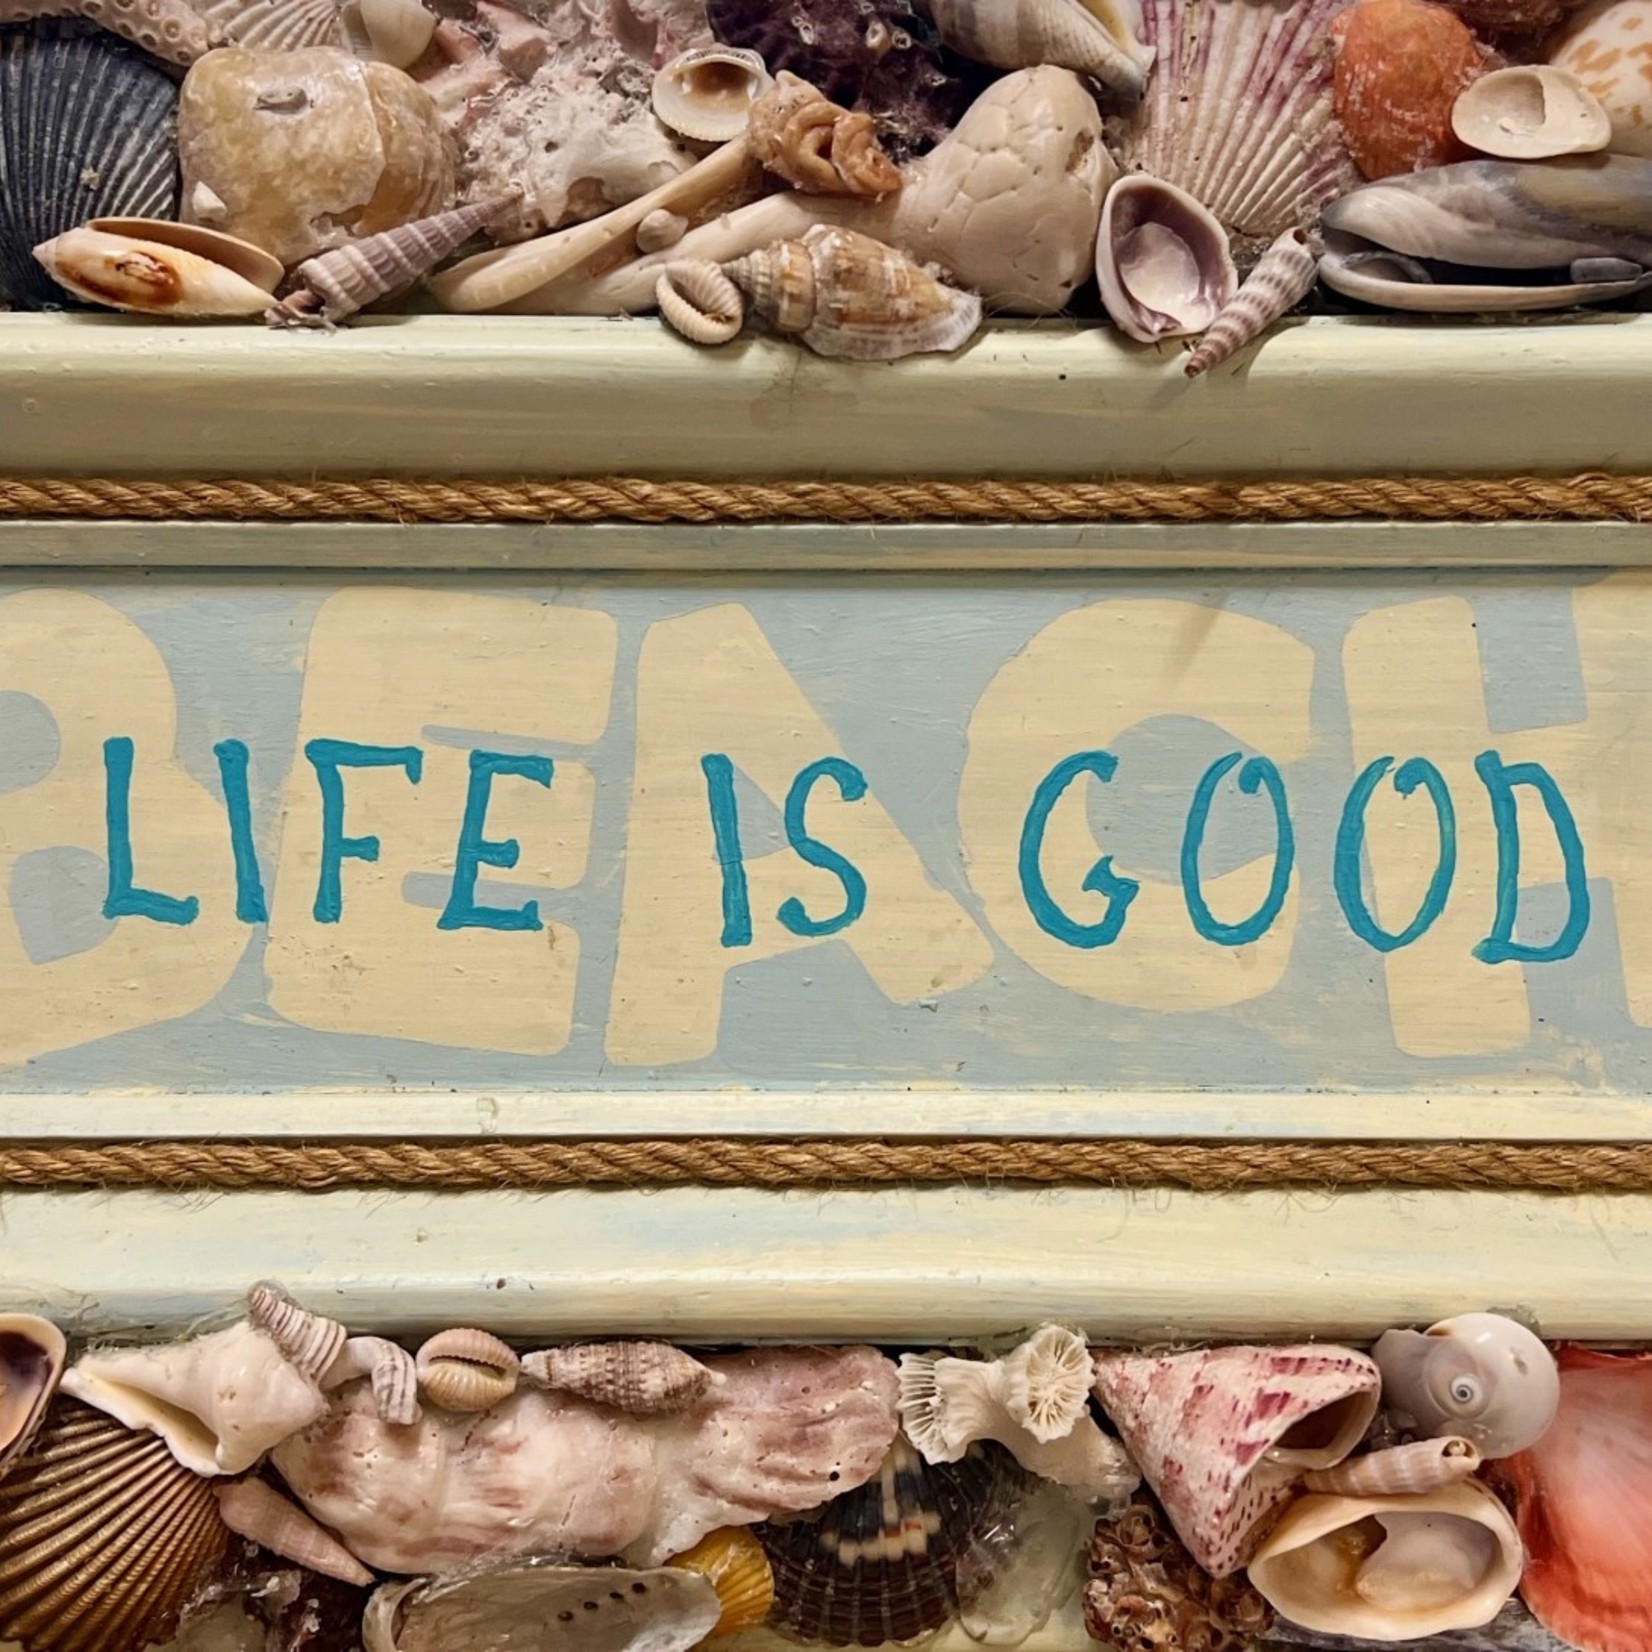 Rare Finds "Life is Good", shell frame, 11x17", RARE